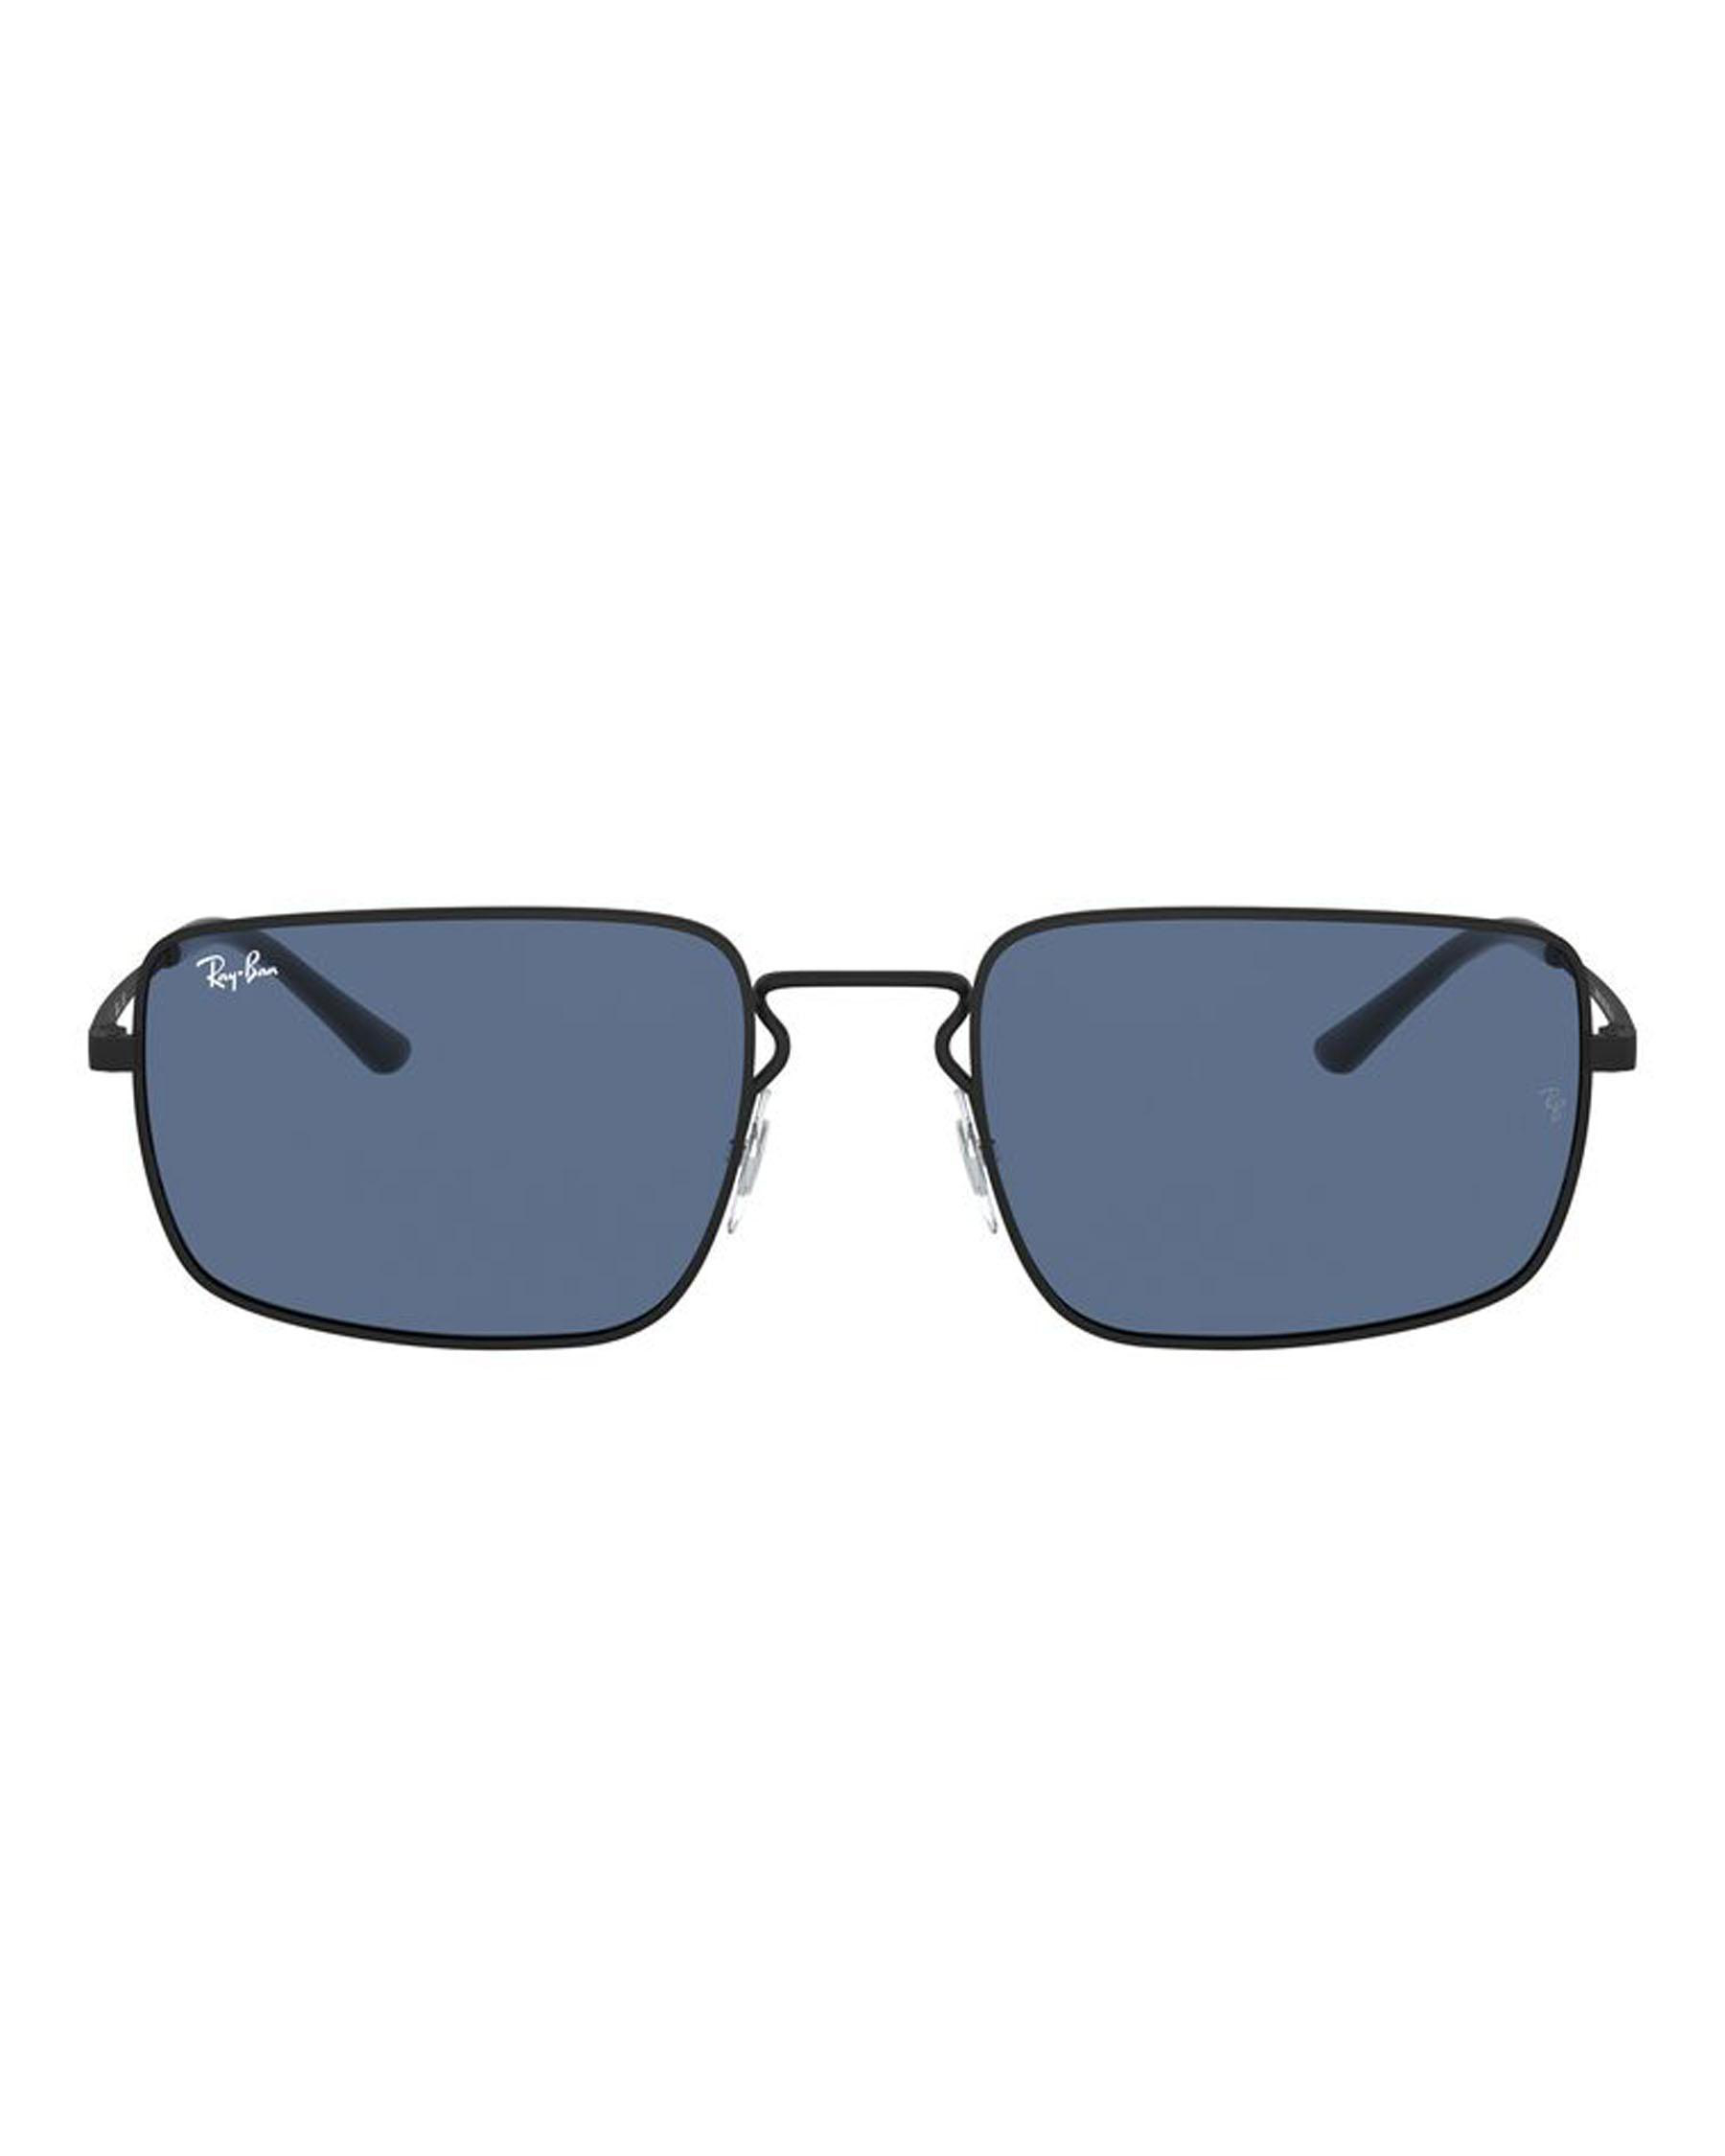 Ray-Ban RB3669 Sunglasses In Rubber Black W/dark Blue - FREE* Shipping ...